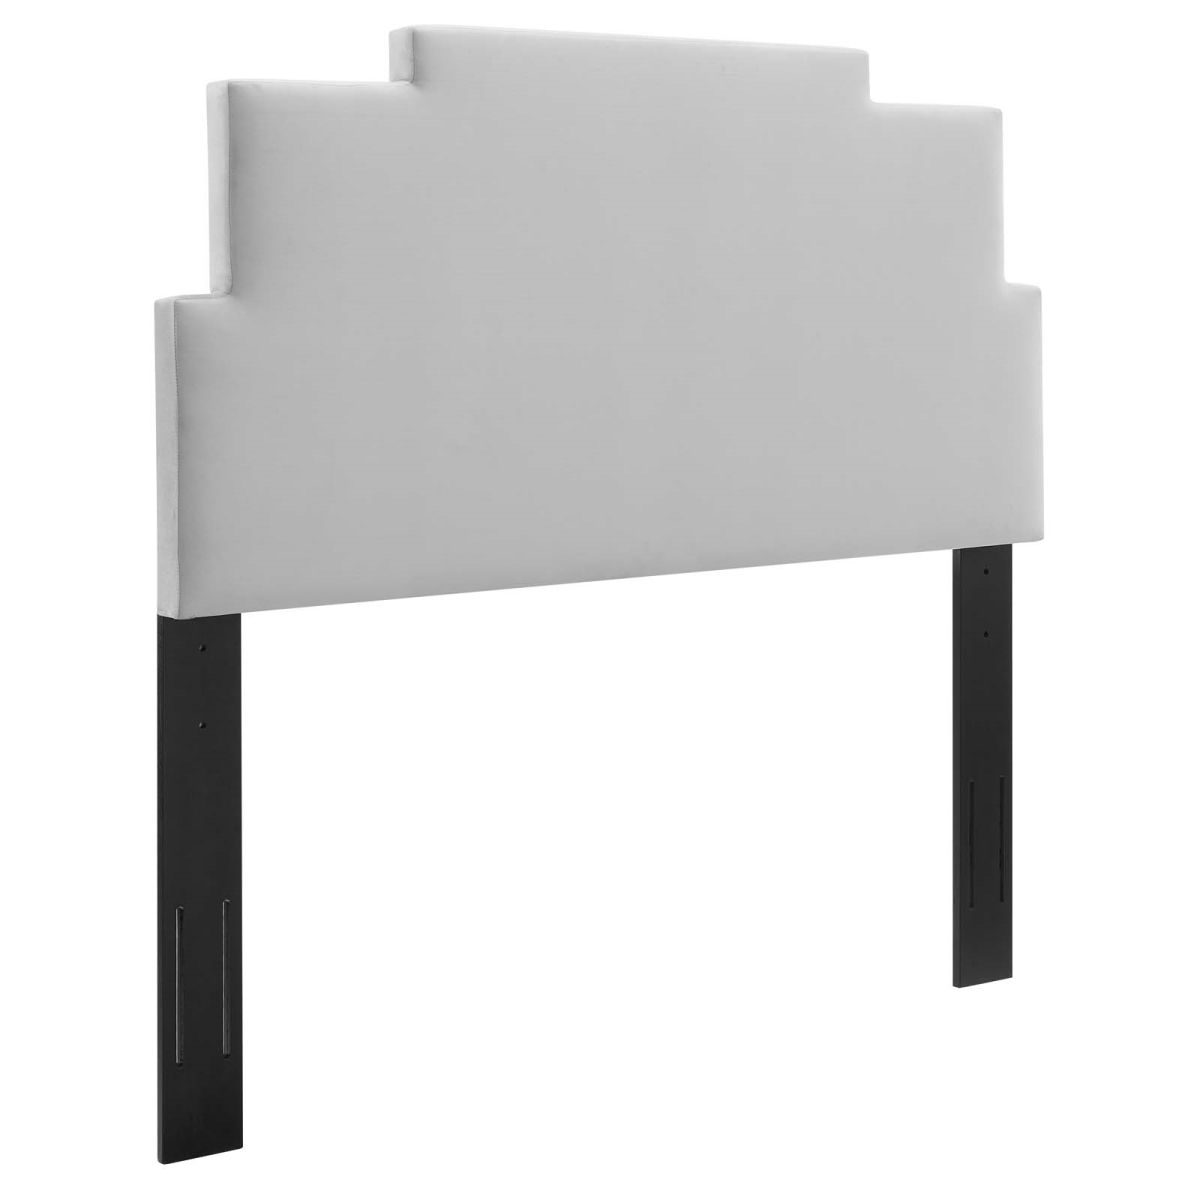 Picture of Modway Furniture MOD-6355-LGR 30.5 x 39 x 3 in. Kasia Performance Velvet Twin Size Headboard, Light Gray